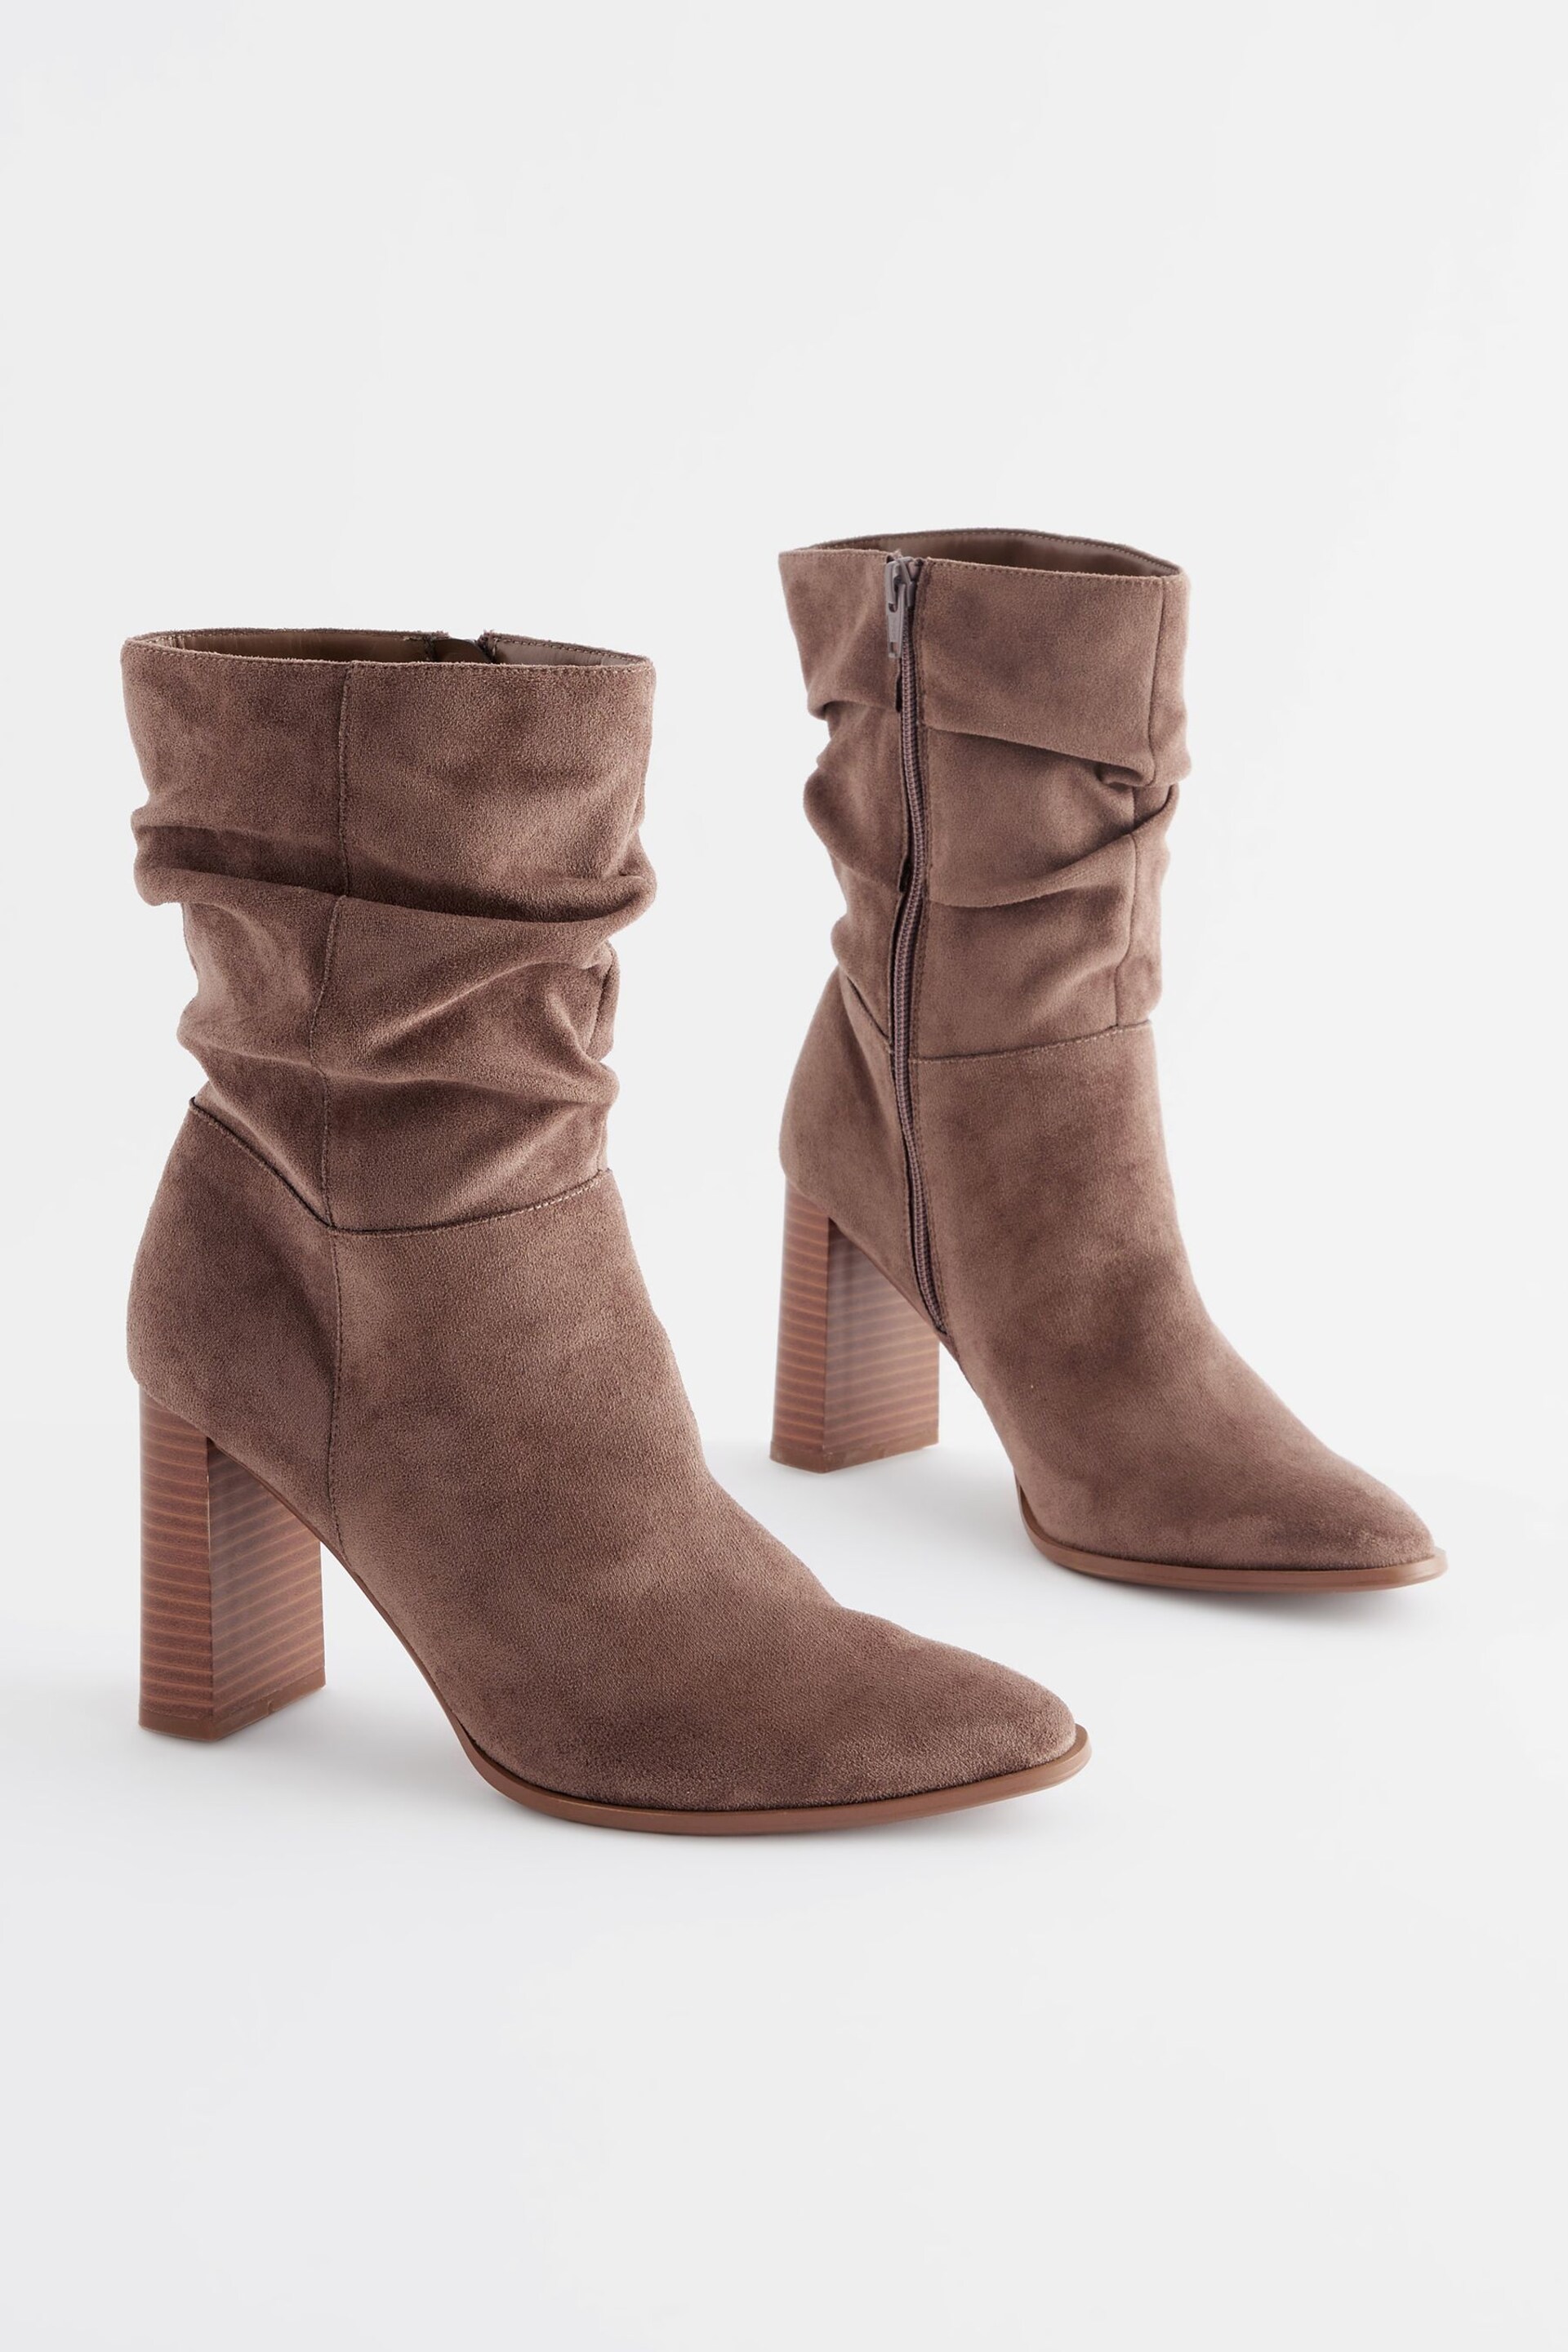 Mink Brown Forever Comfort® Heeled Slouch Midi Boots - Image 4 of 7